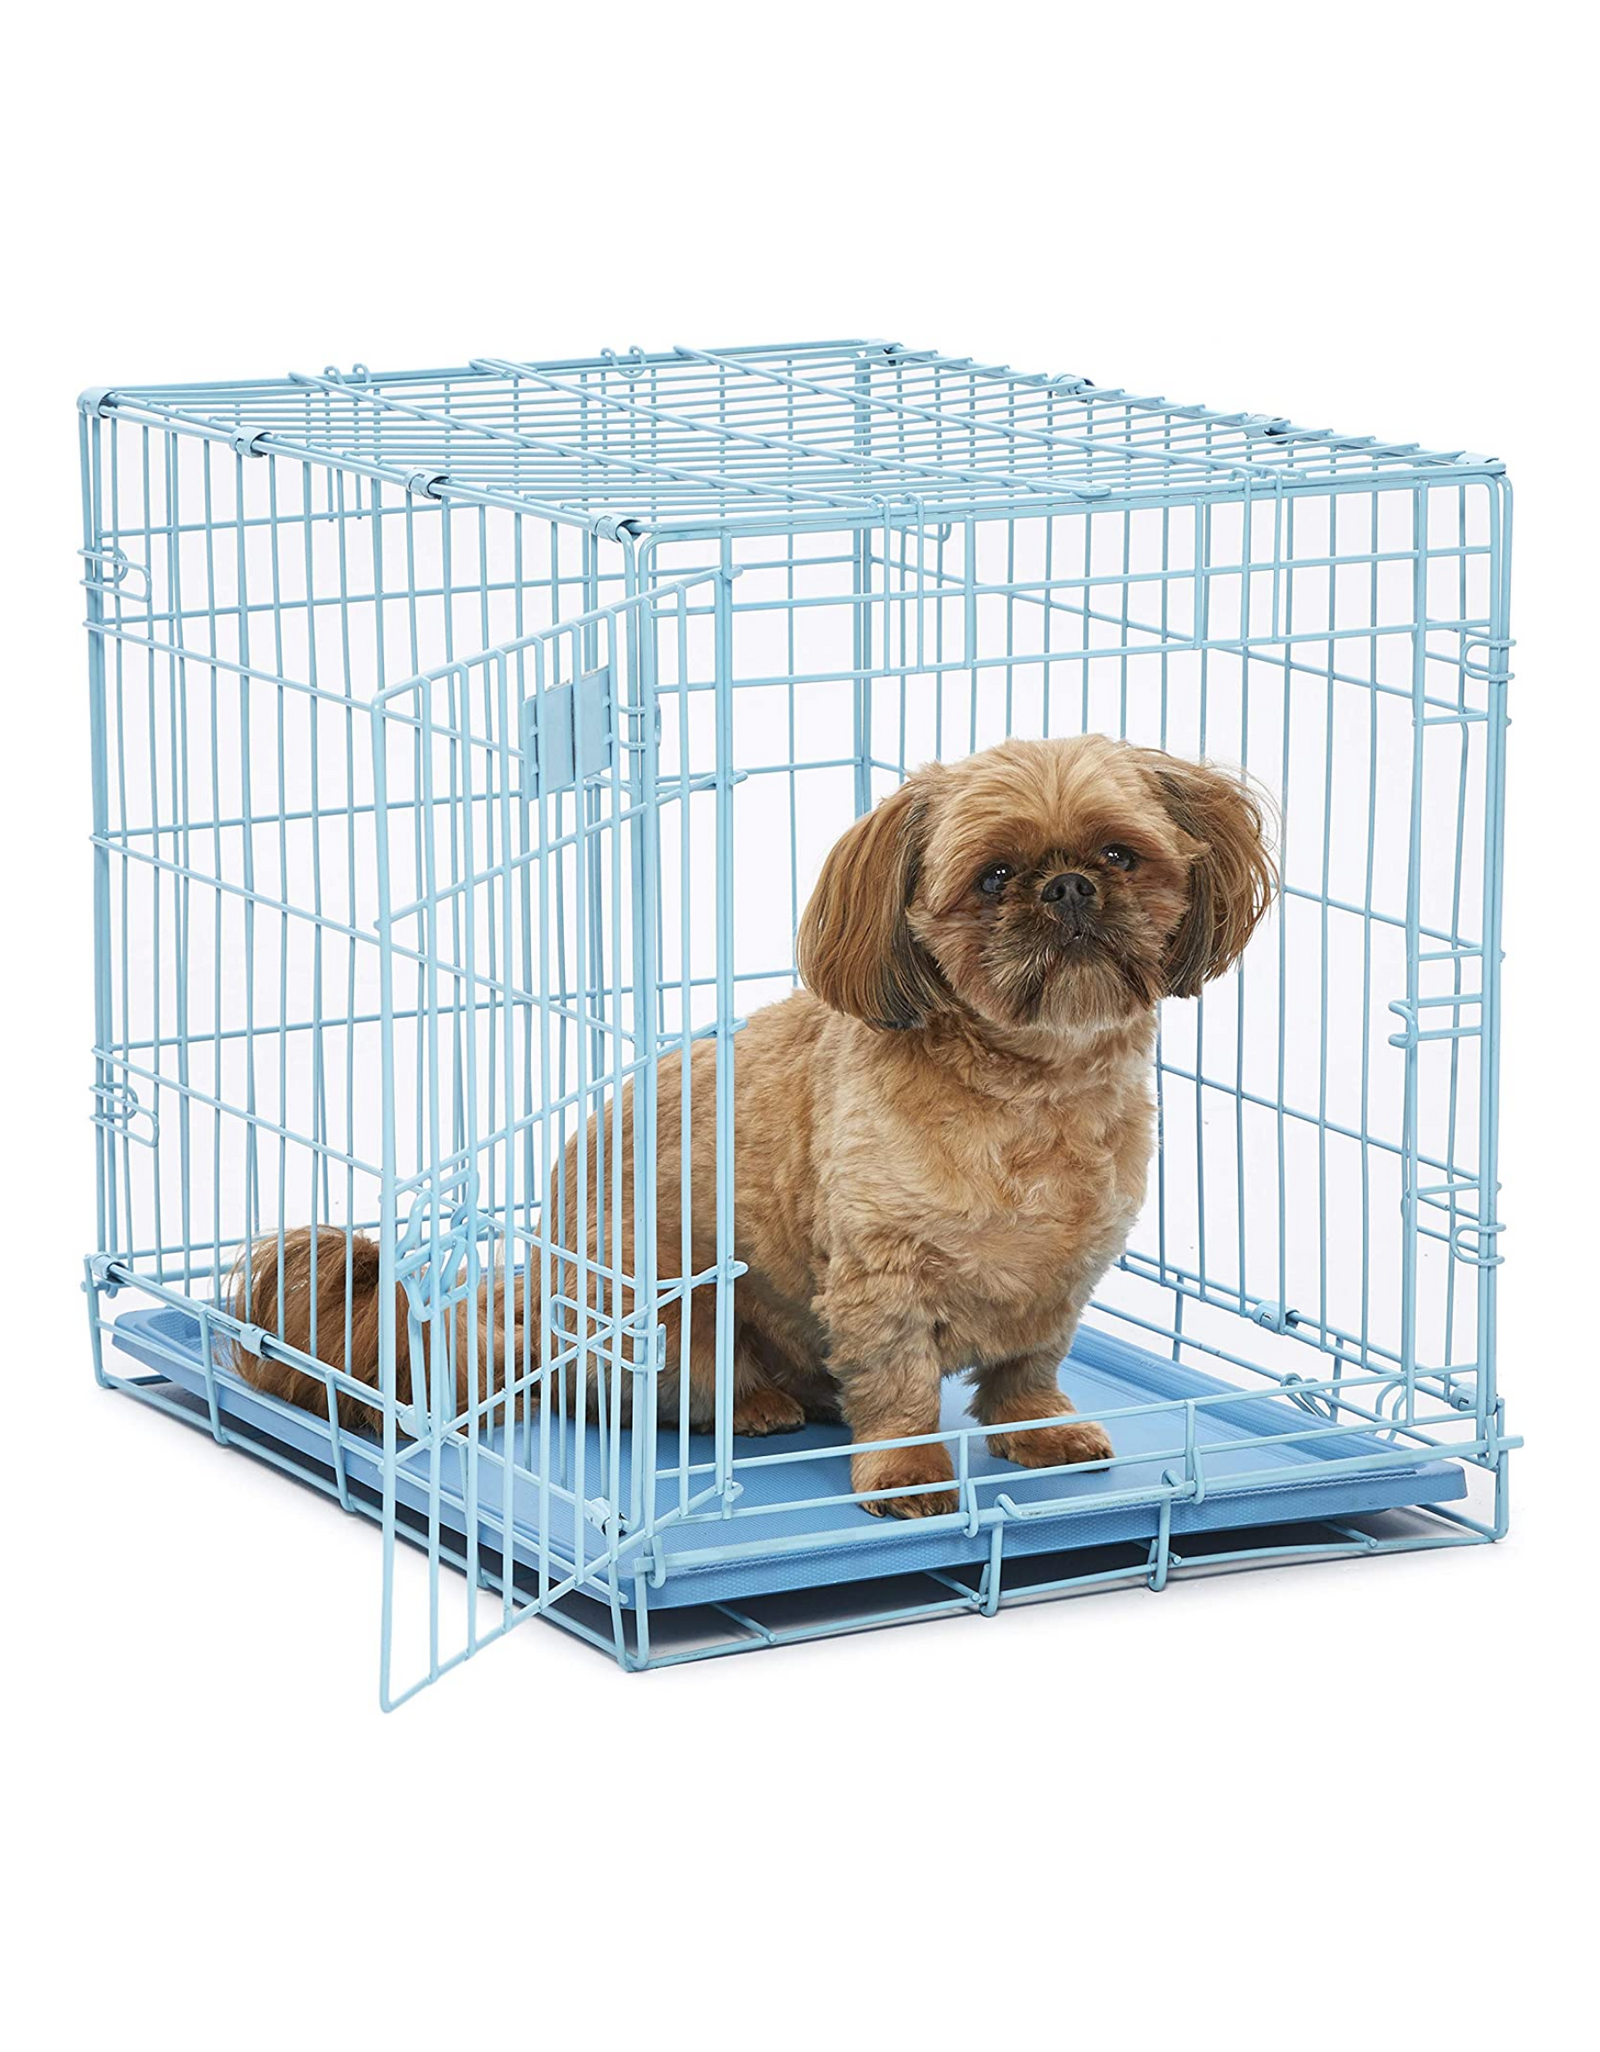 Blue Dog Crate | MidWest iCrate 24.77" Blue Folding Metal Dog Crate w/ Divider Panel